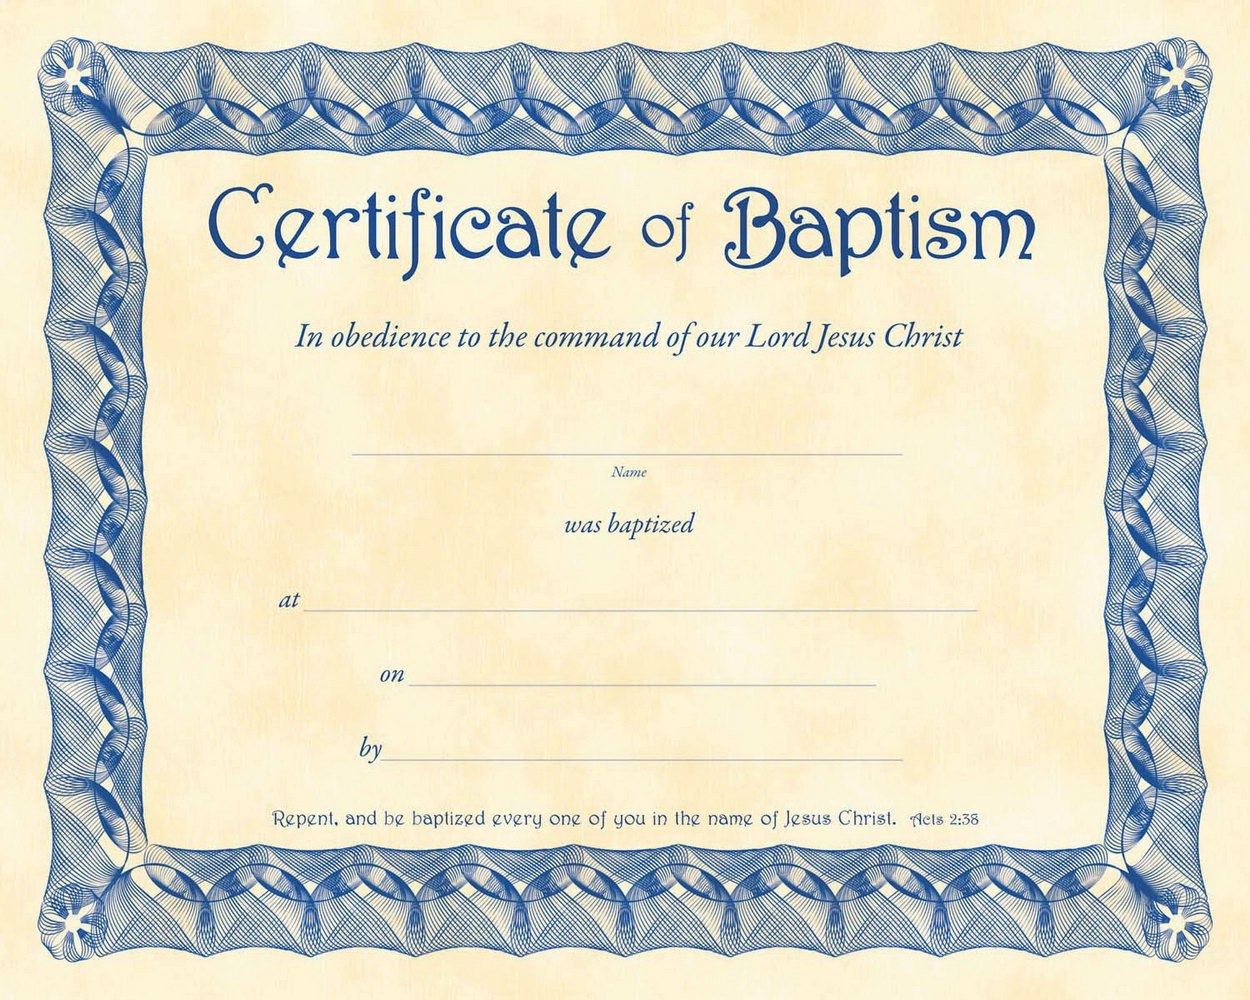 Baptism Certificate Template Pdf Ideas Awesome Of Broadman Word pertaining to Christian Baptism Certificate Template